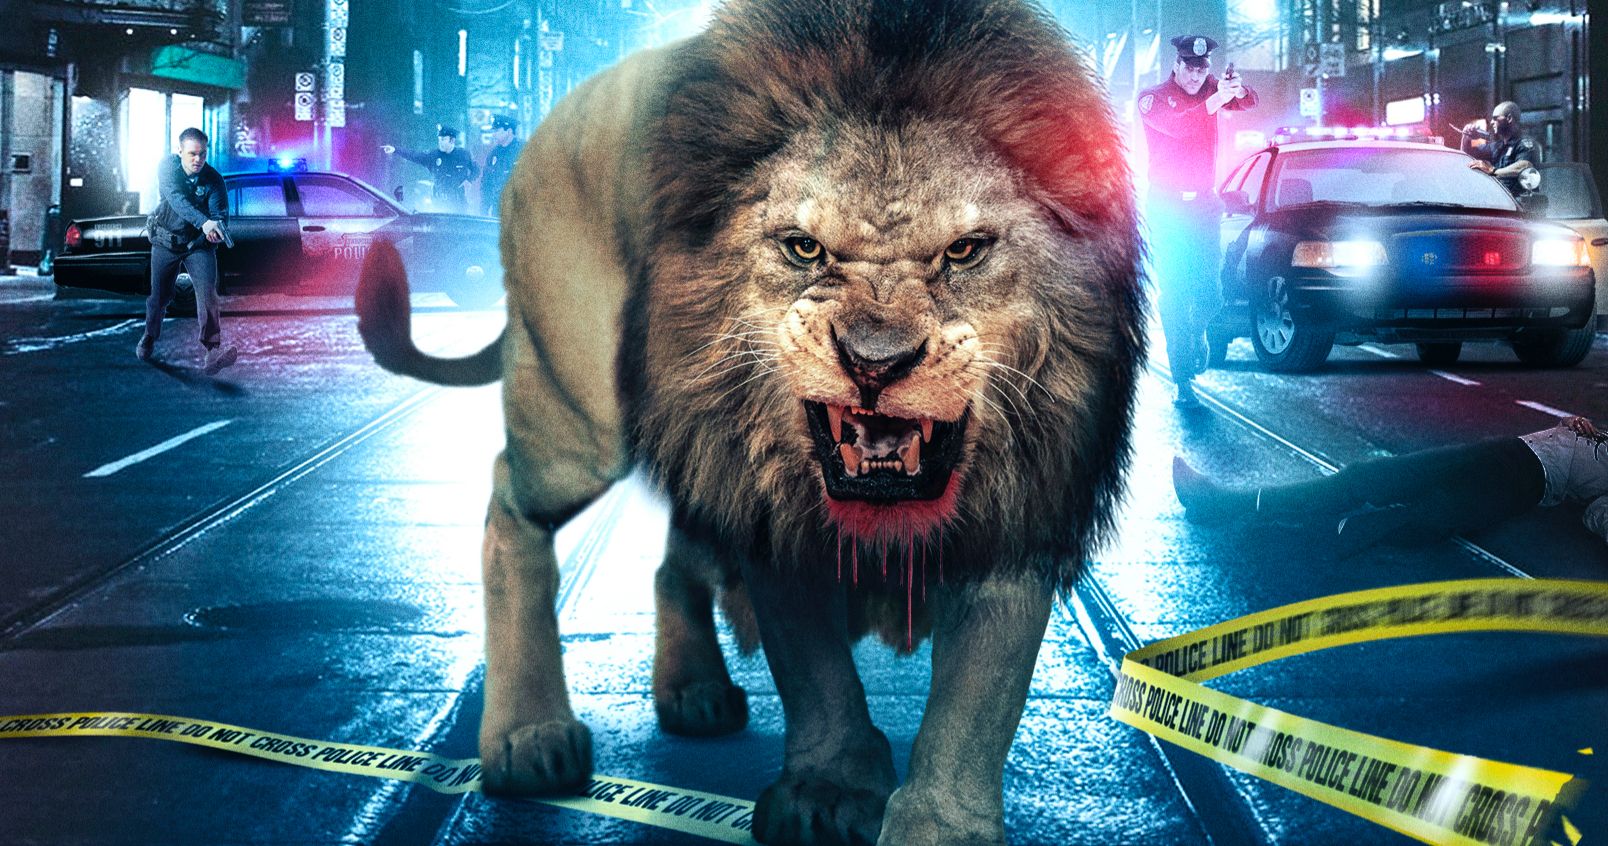 Uncaged Trailer: A Giant Lion Is on the Loose and Very Hungry